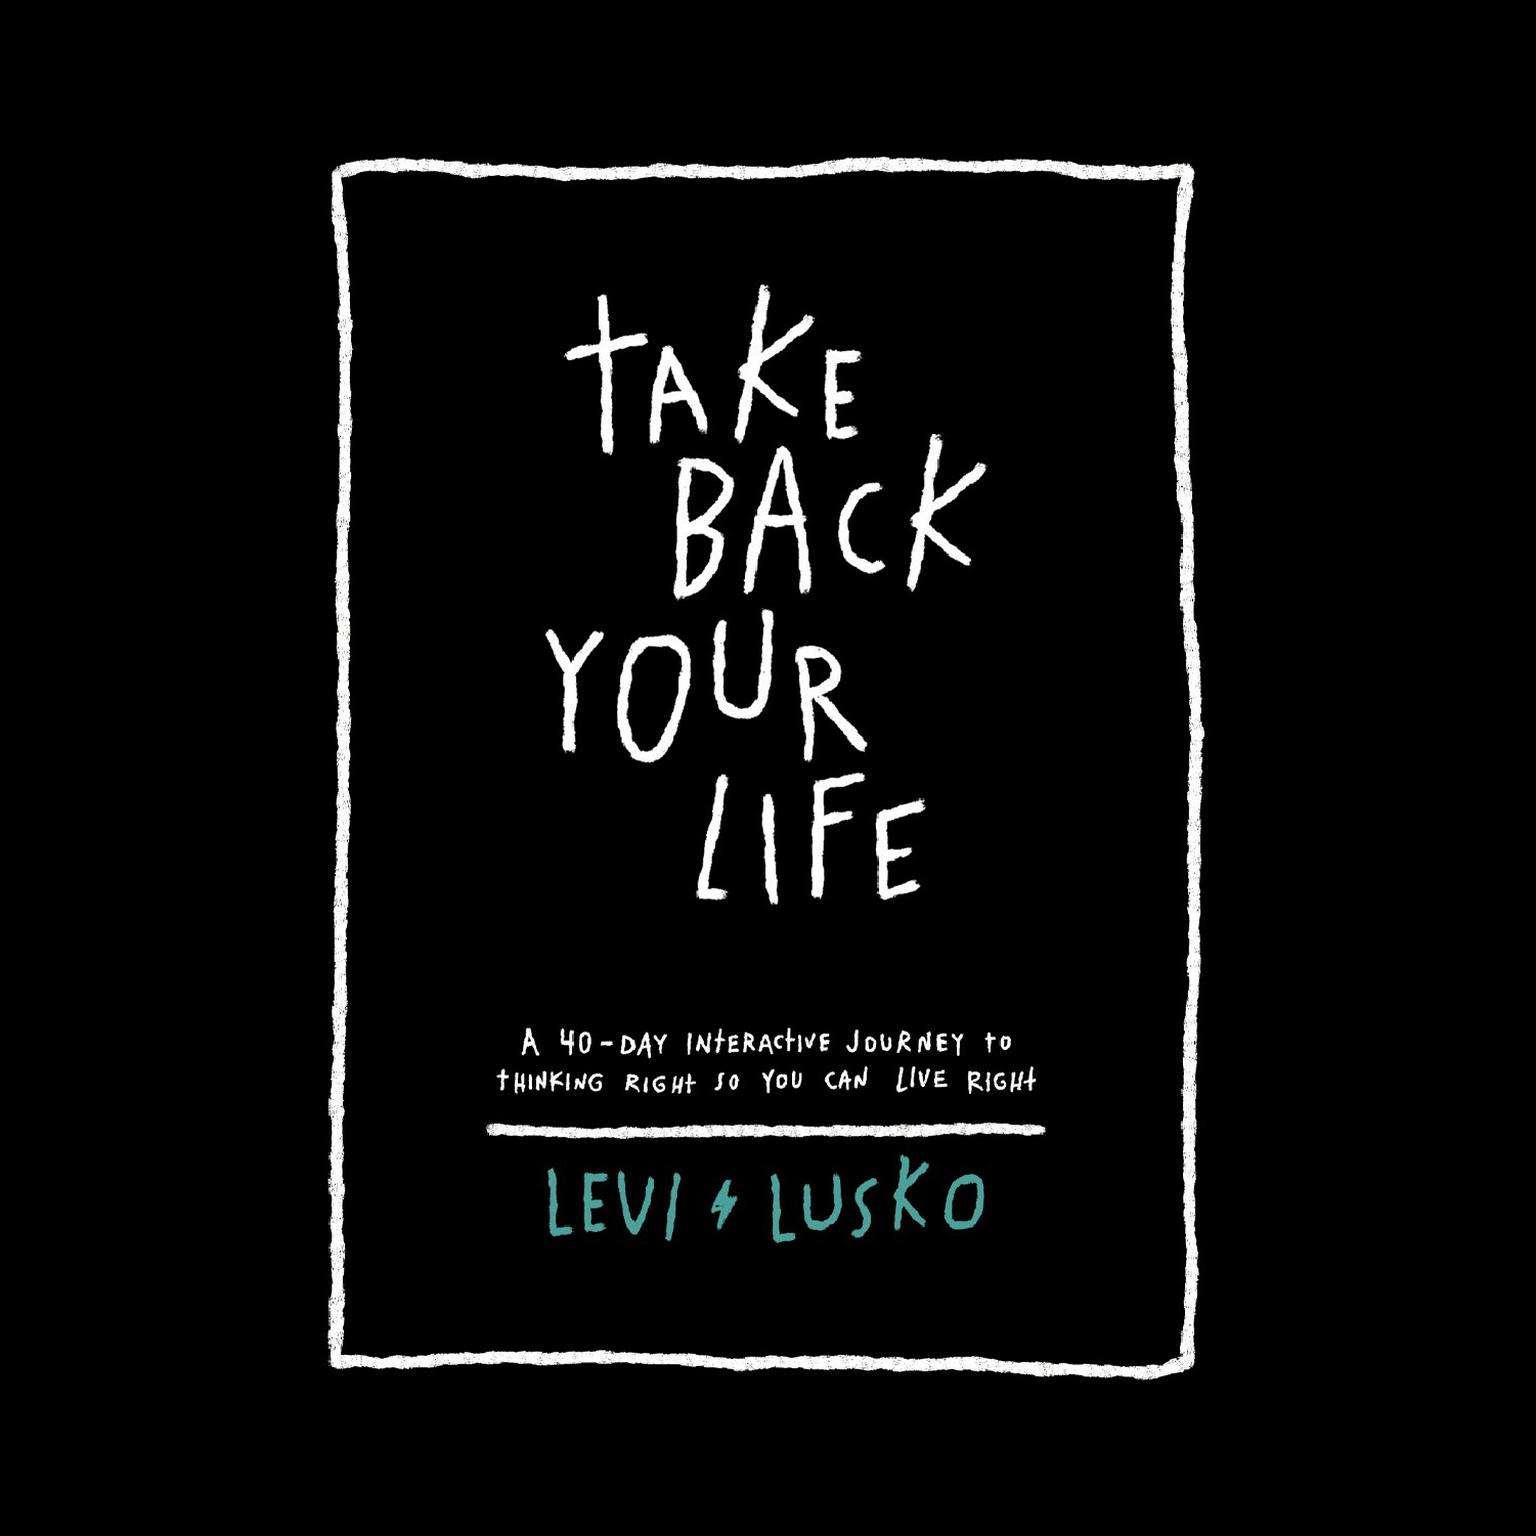 Take Back Your Life: A 40-Day Interactive Journey to Thinking Right So You Can Live Right Audiobook, by Levi Lusko